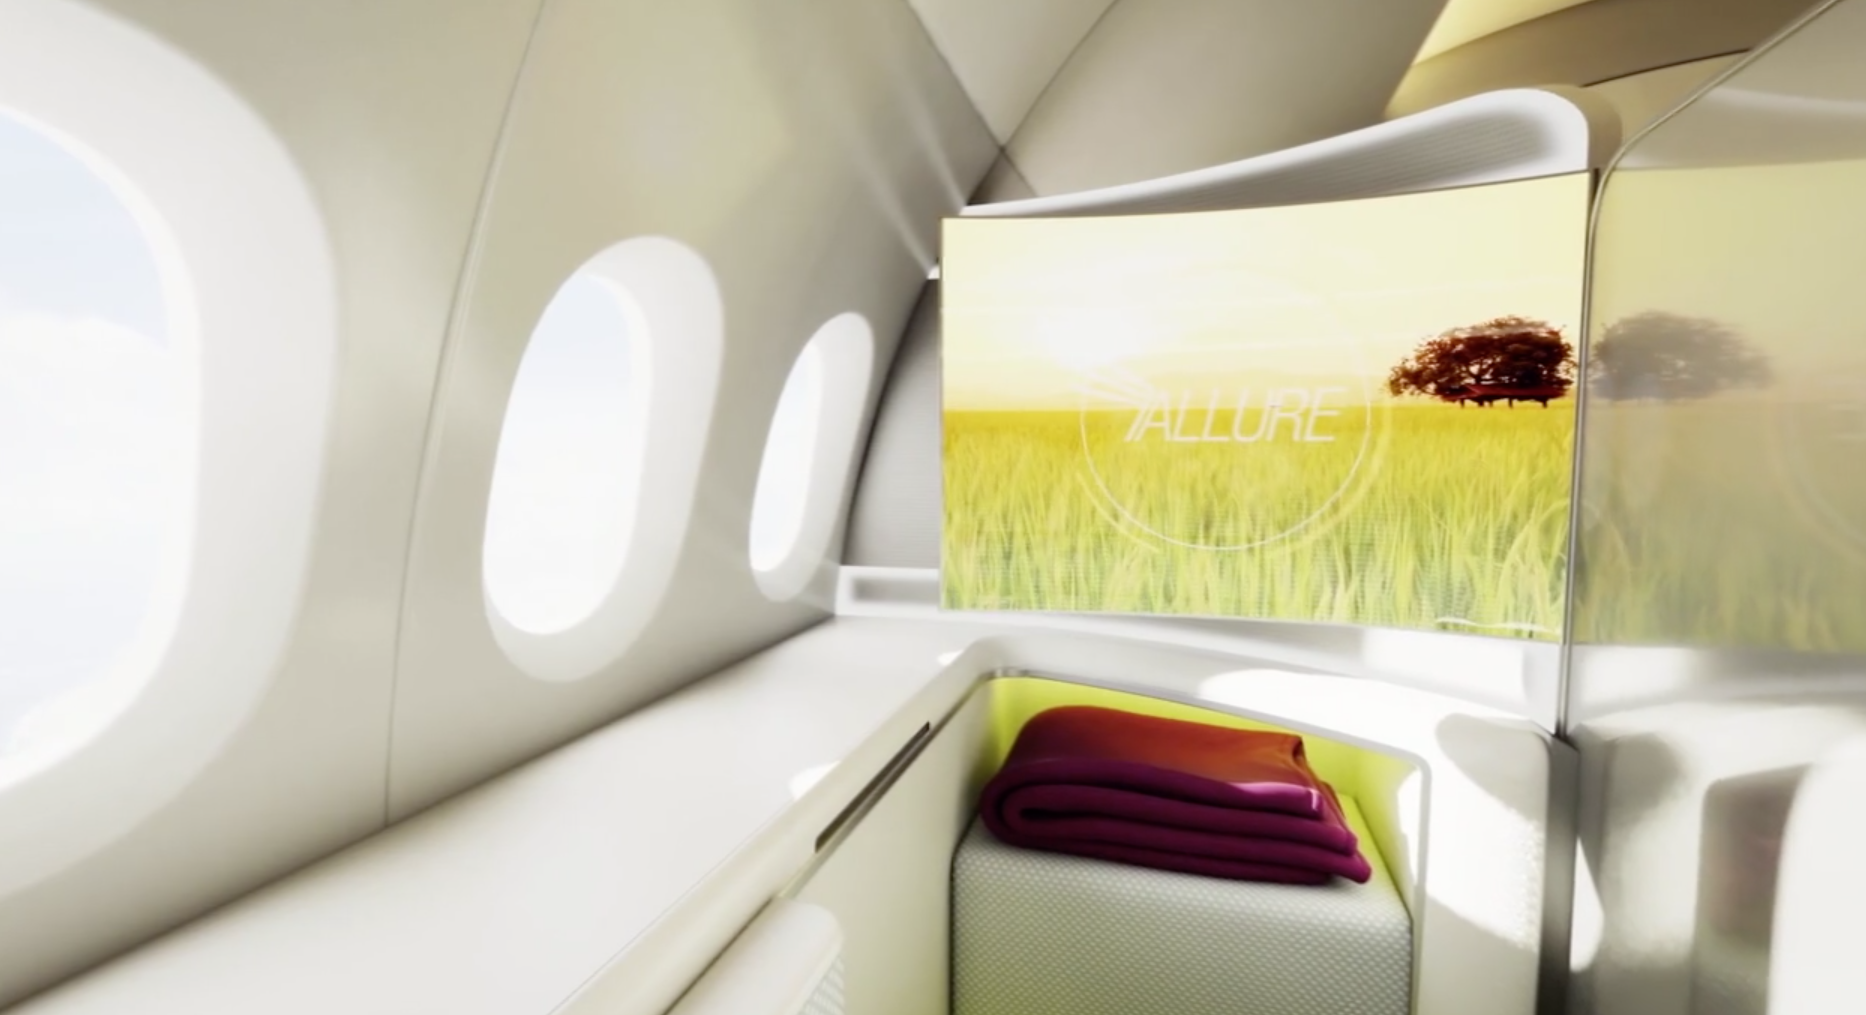 Boeing Wants To Turn The Interiors Of Its Planes Into Giant Screens